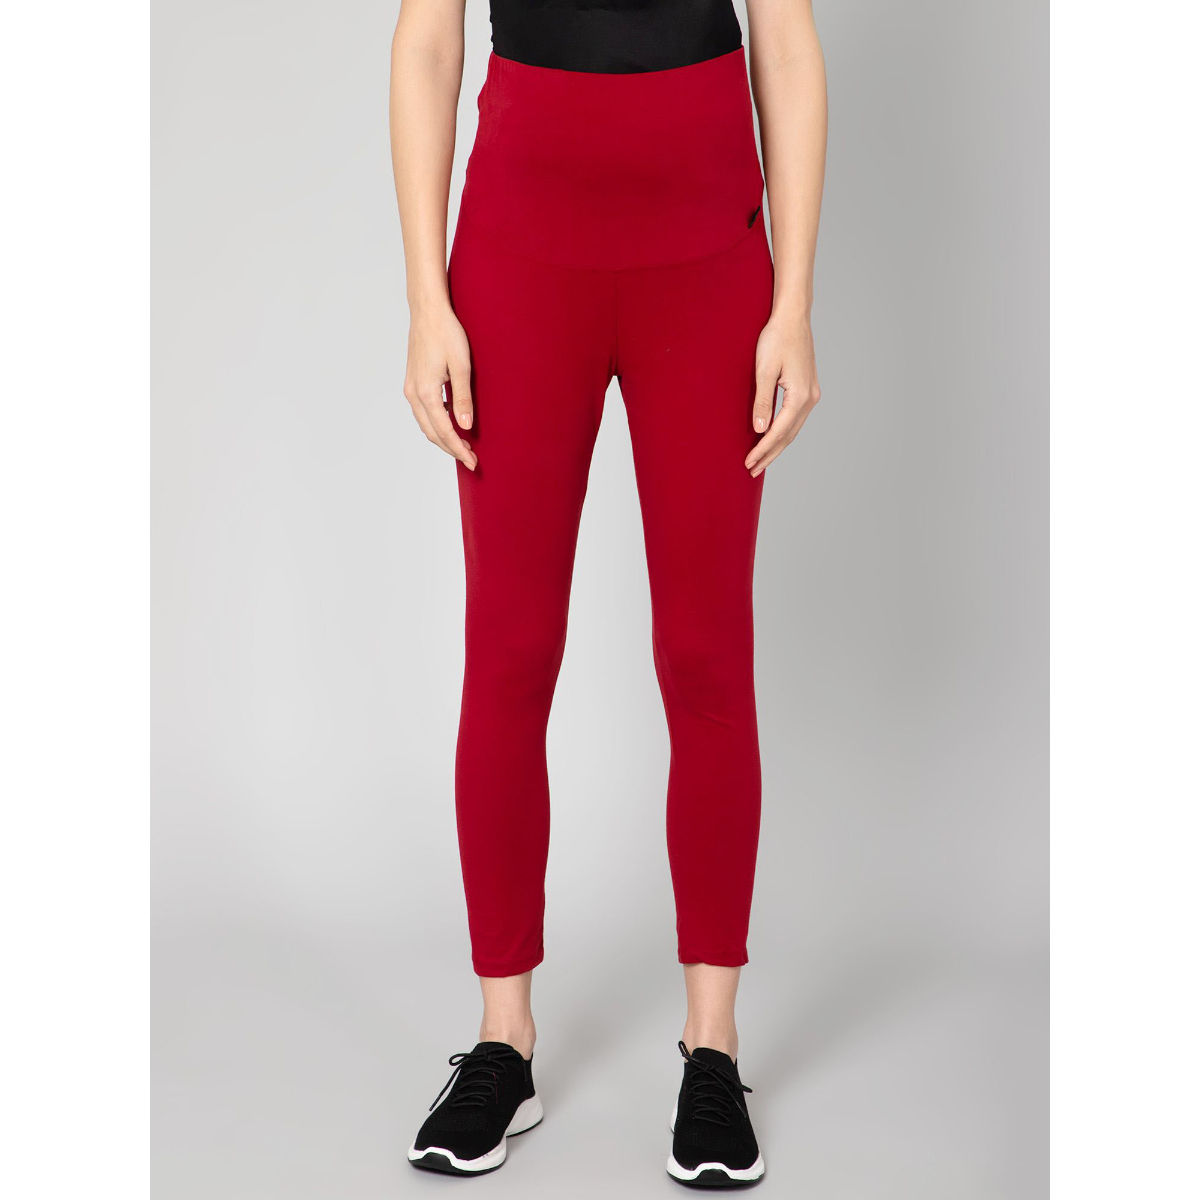 Frenchtrendz | Buy Frenchtrendz Modal Spandex Maroon Ankle Leggings Online